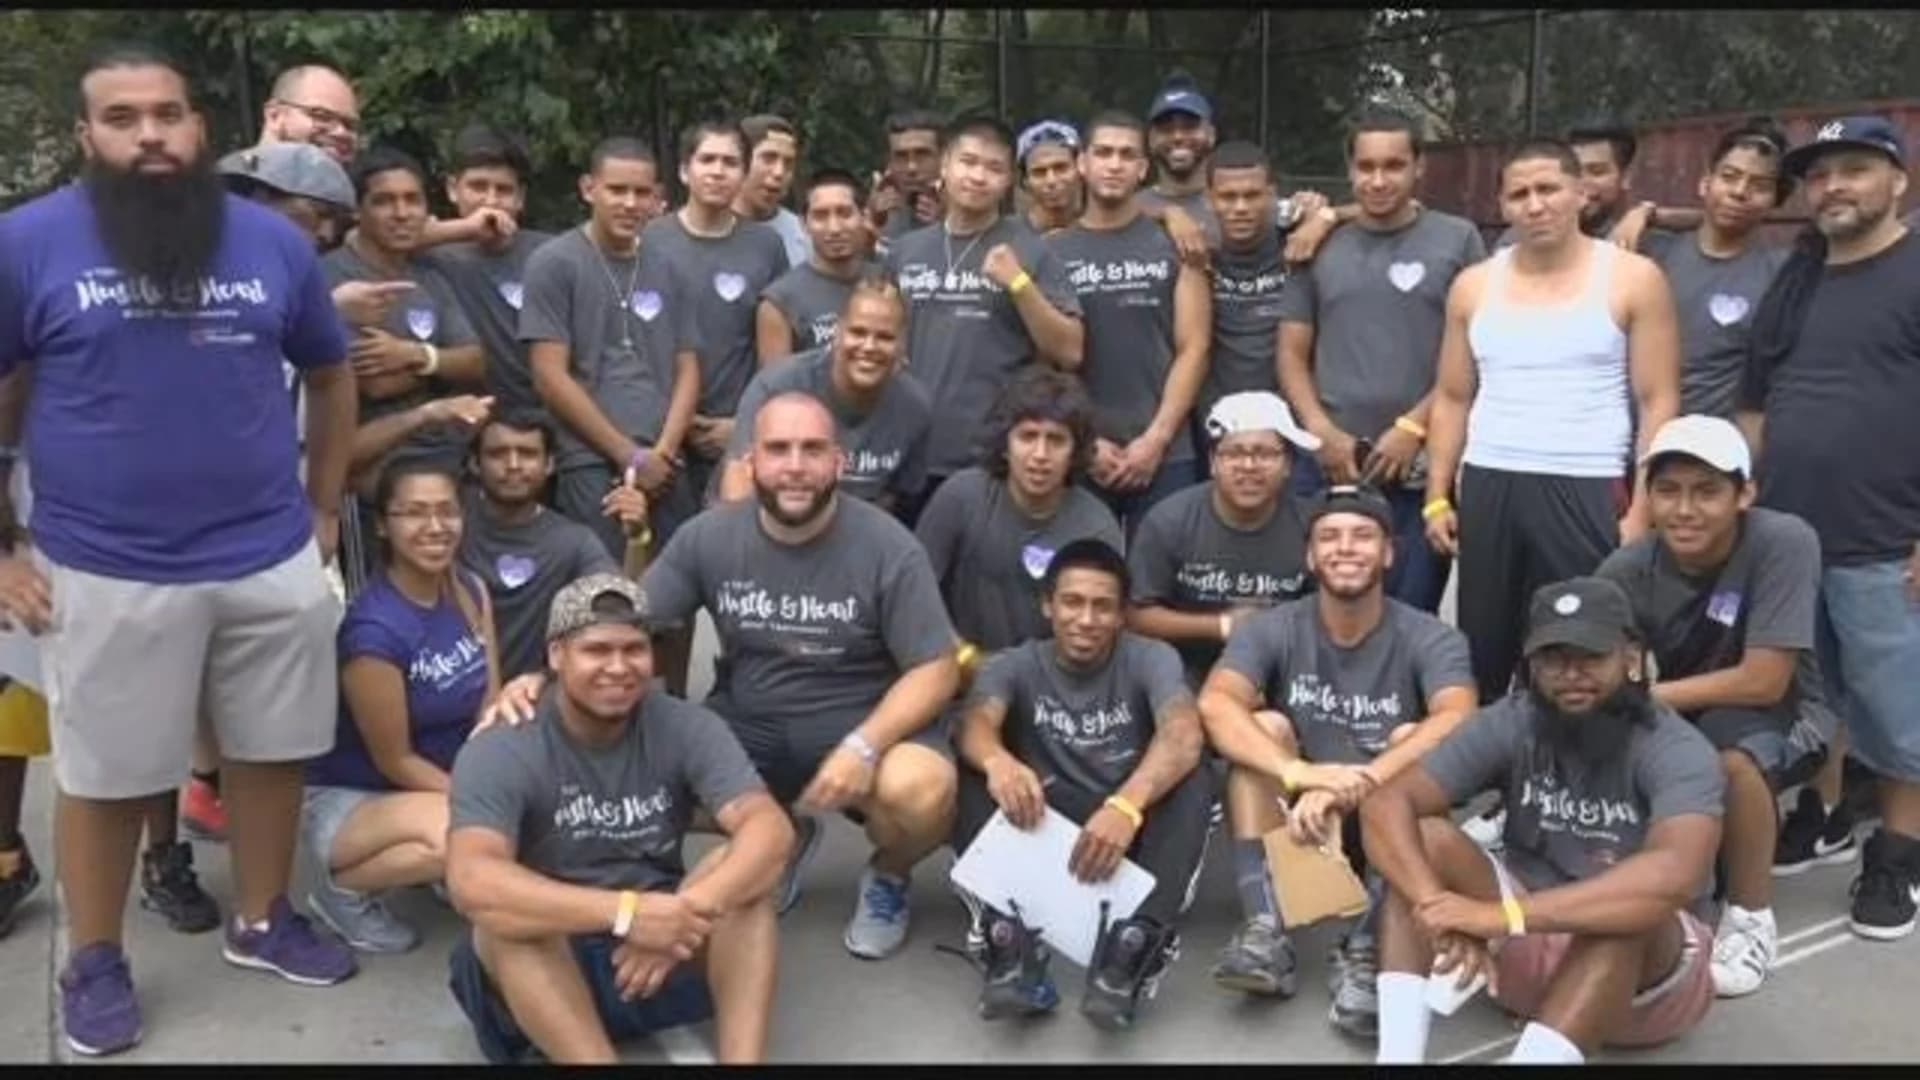 Officers, Bushwick residents compete in 'Cops vs. Community' event